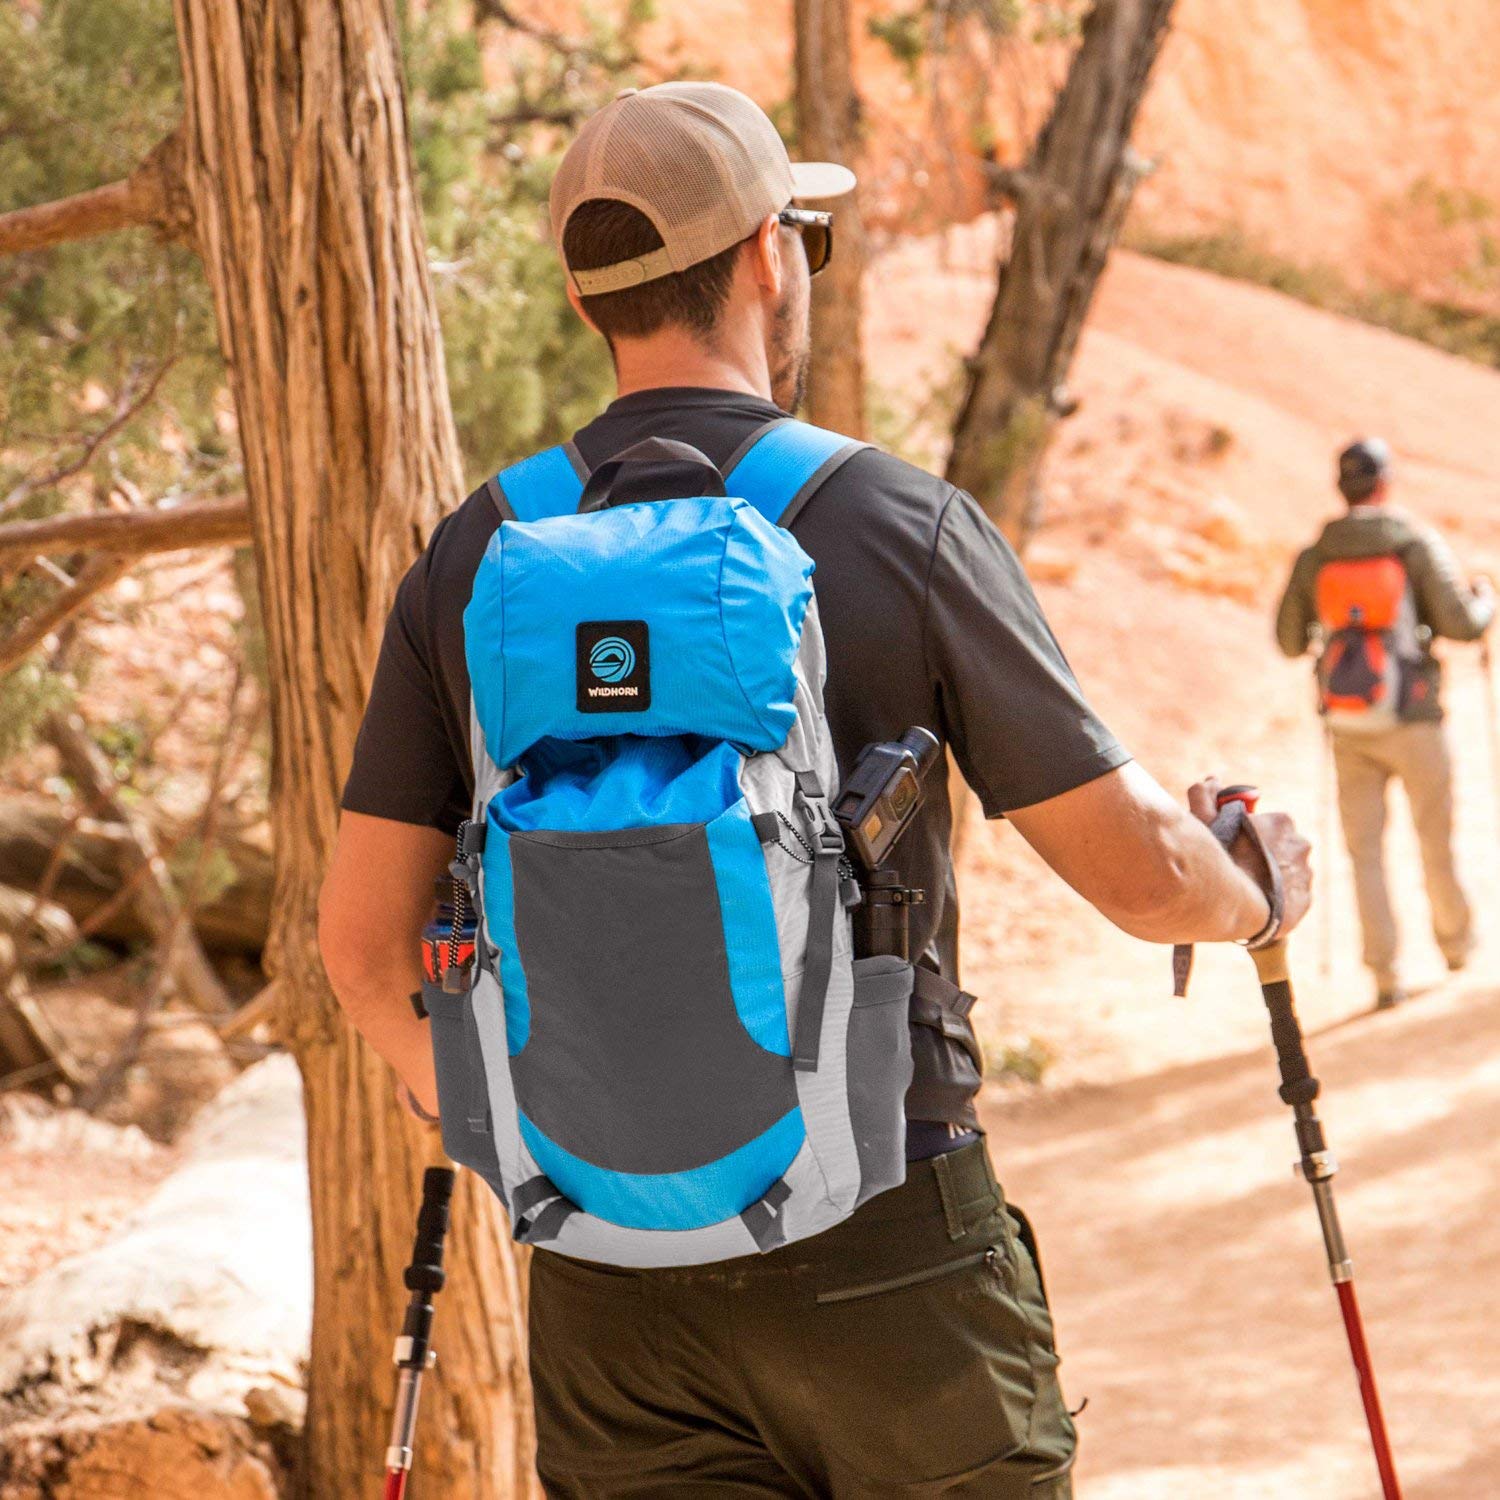 Today only: WildHorn Outfitters hiking backpack for $18